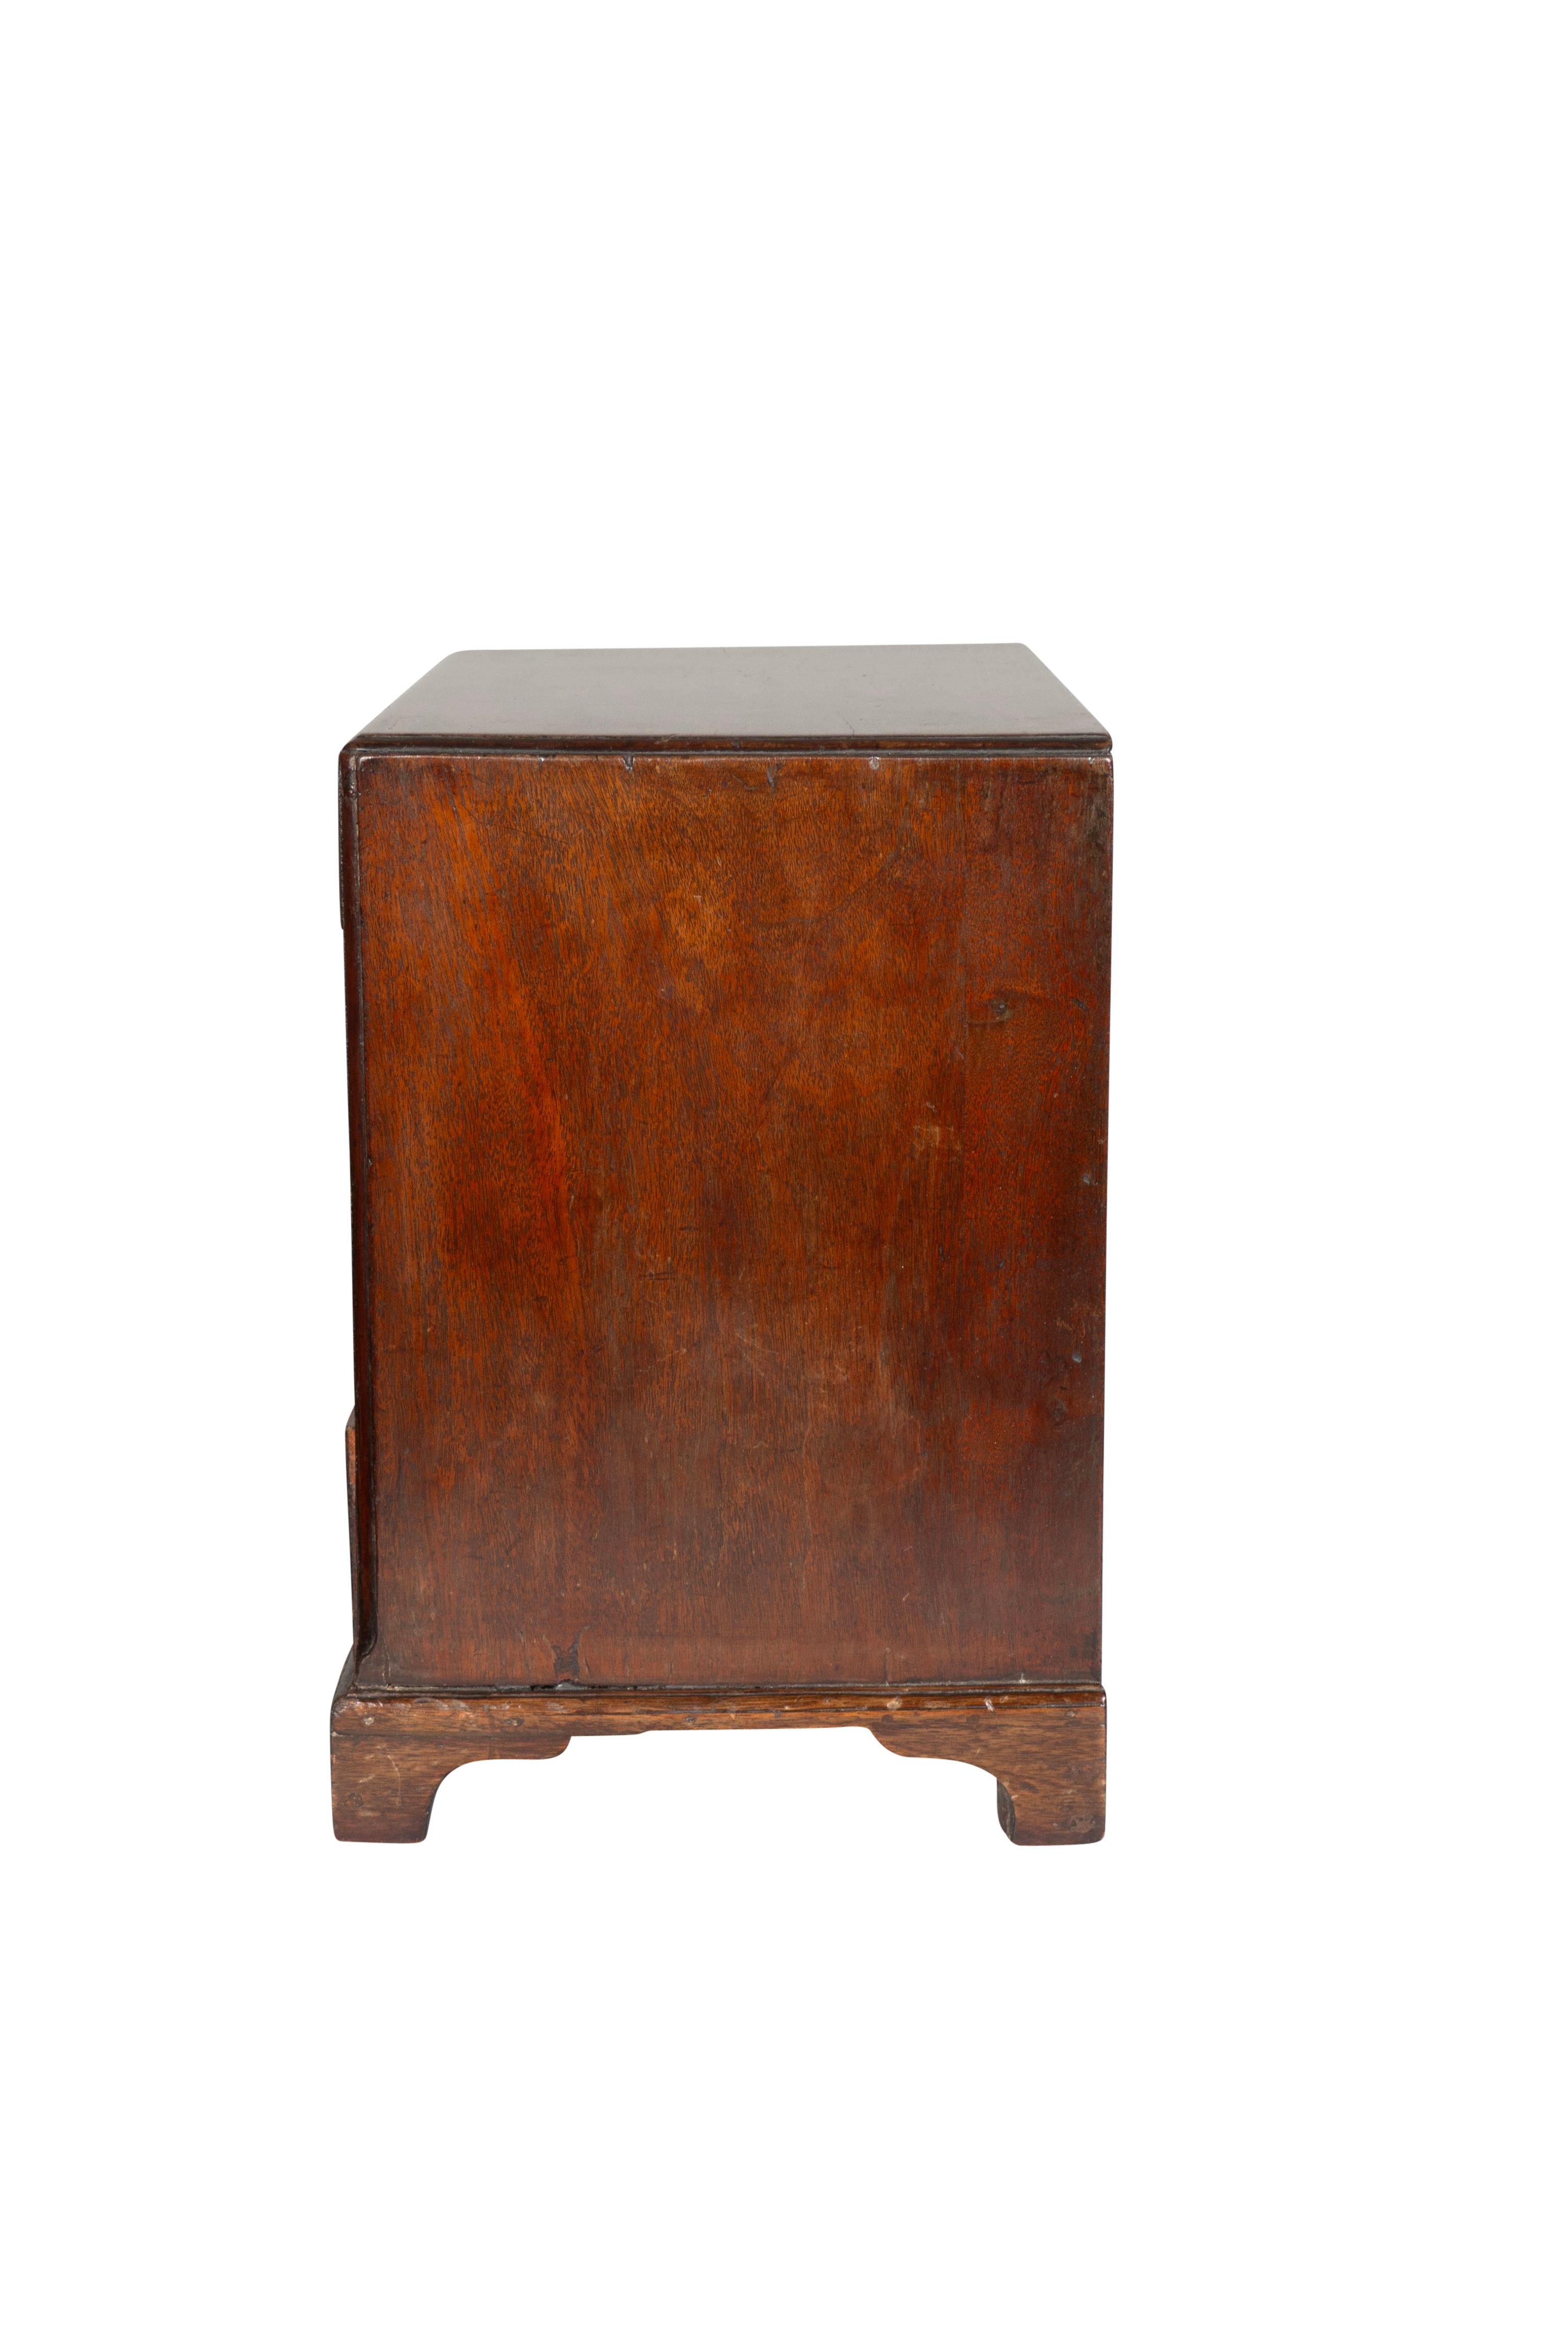 Late 18th Century George III Mahogany Miniature Chest Of Drawers